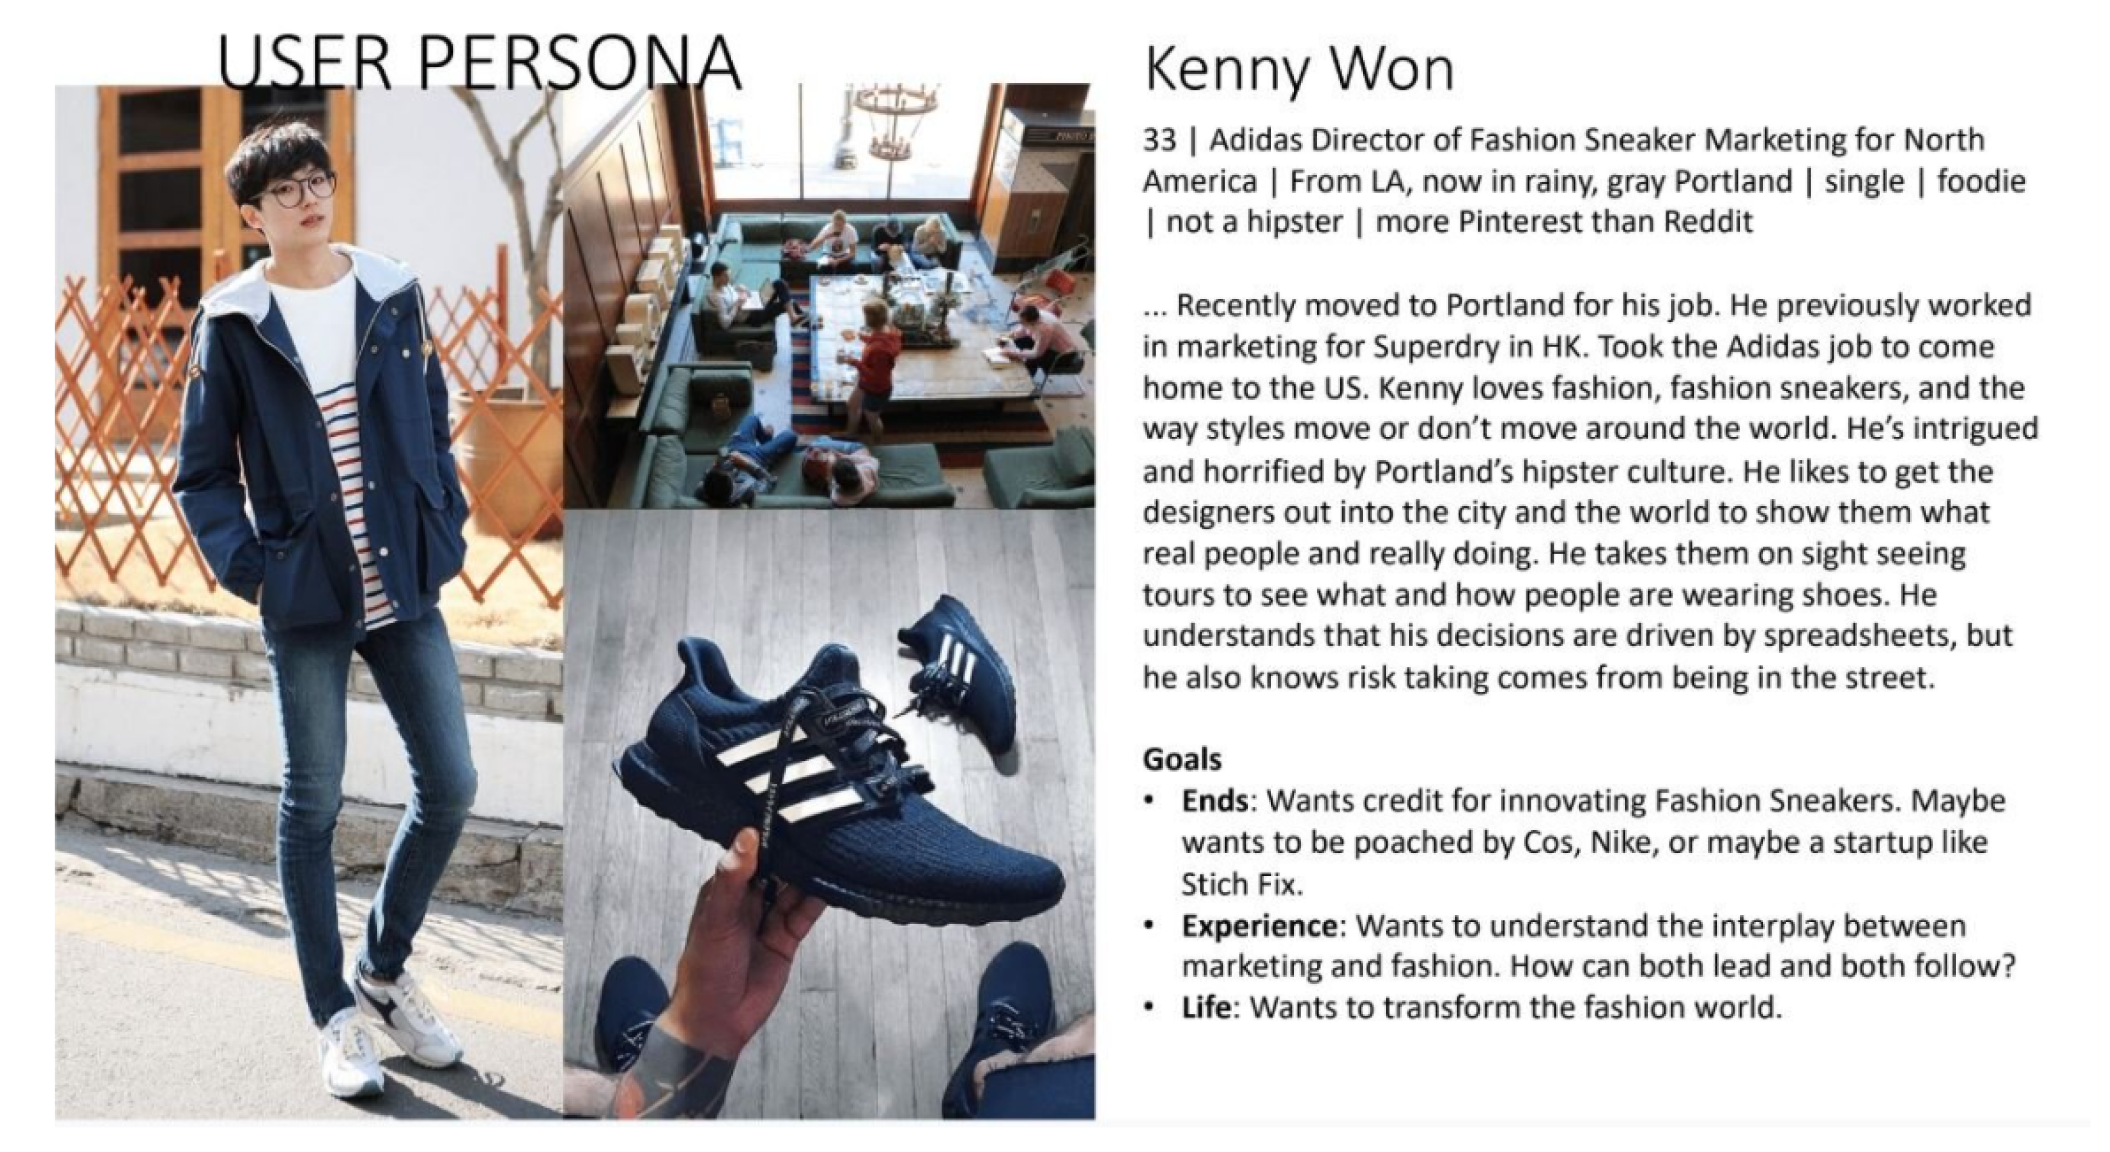 Title says user persona. On the left is a collectio of images a full body image of a light East Asian man, along with a meeting room on the top rightm and a picture of an adidas shoe on the bottom right. On the left is his name which is Kenny Won. Under that is a description of him and his goals. The full text is '33, Adidas Director od Fashion Sneaker Marketing for North America, From LA, now in rainy Portlan, single, foodie, not a hipster, more Pinterest than Reddit. ...Recently moved to Portland for his job. He previously worled in marketing for Superdry in HK. Took the Adidas job to come home to the US. Kenny loves fashion, fashion sneakers, and the way sttyles move around the world. He's intrigued and horrified by Portland's hipster culture. He likes to get the designers out into the cit and the world to show them what real people are really doing. He takes them on sight seeing tours to see what and how people are wearing showes. He understands that his decisions by spreadsheets, but he also knows risk taking comes from being in the street. Goals: -Ends:Wants credit for innovating Fashion Sneakers. Maybe wants to be poached by Cos, Nike, or mayve a startup like Stichfix. -Experience: Wants to understand the interplay between marketing and fashion. How can both lead and both follow? -Life:Wants to transform the fashion world.'